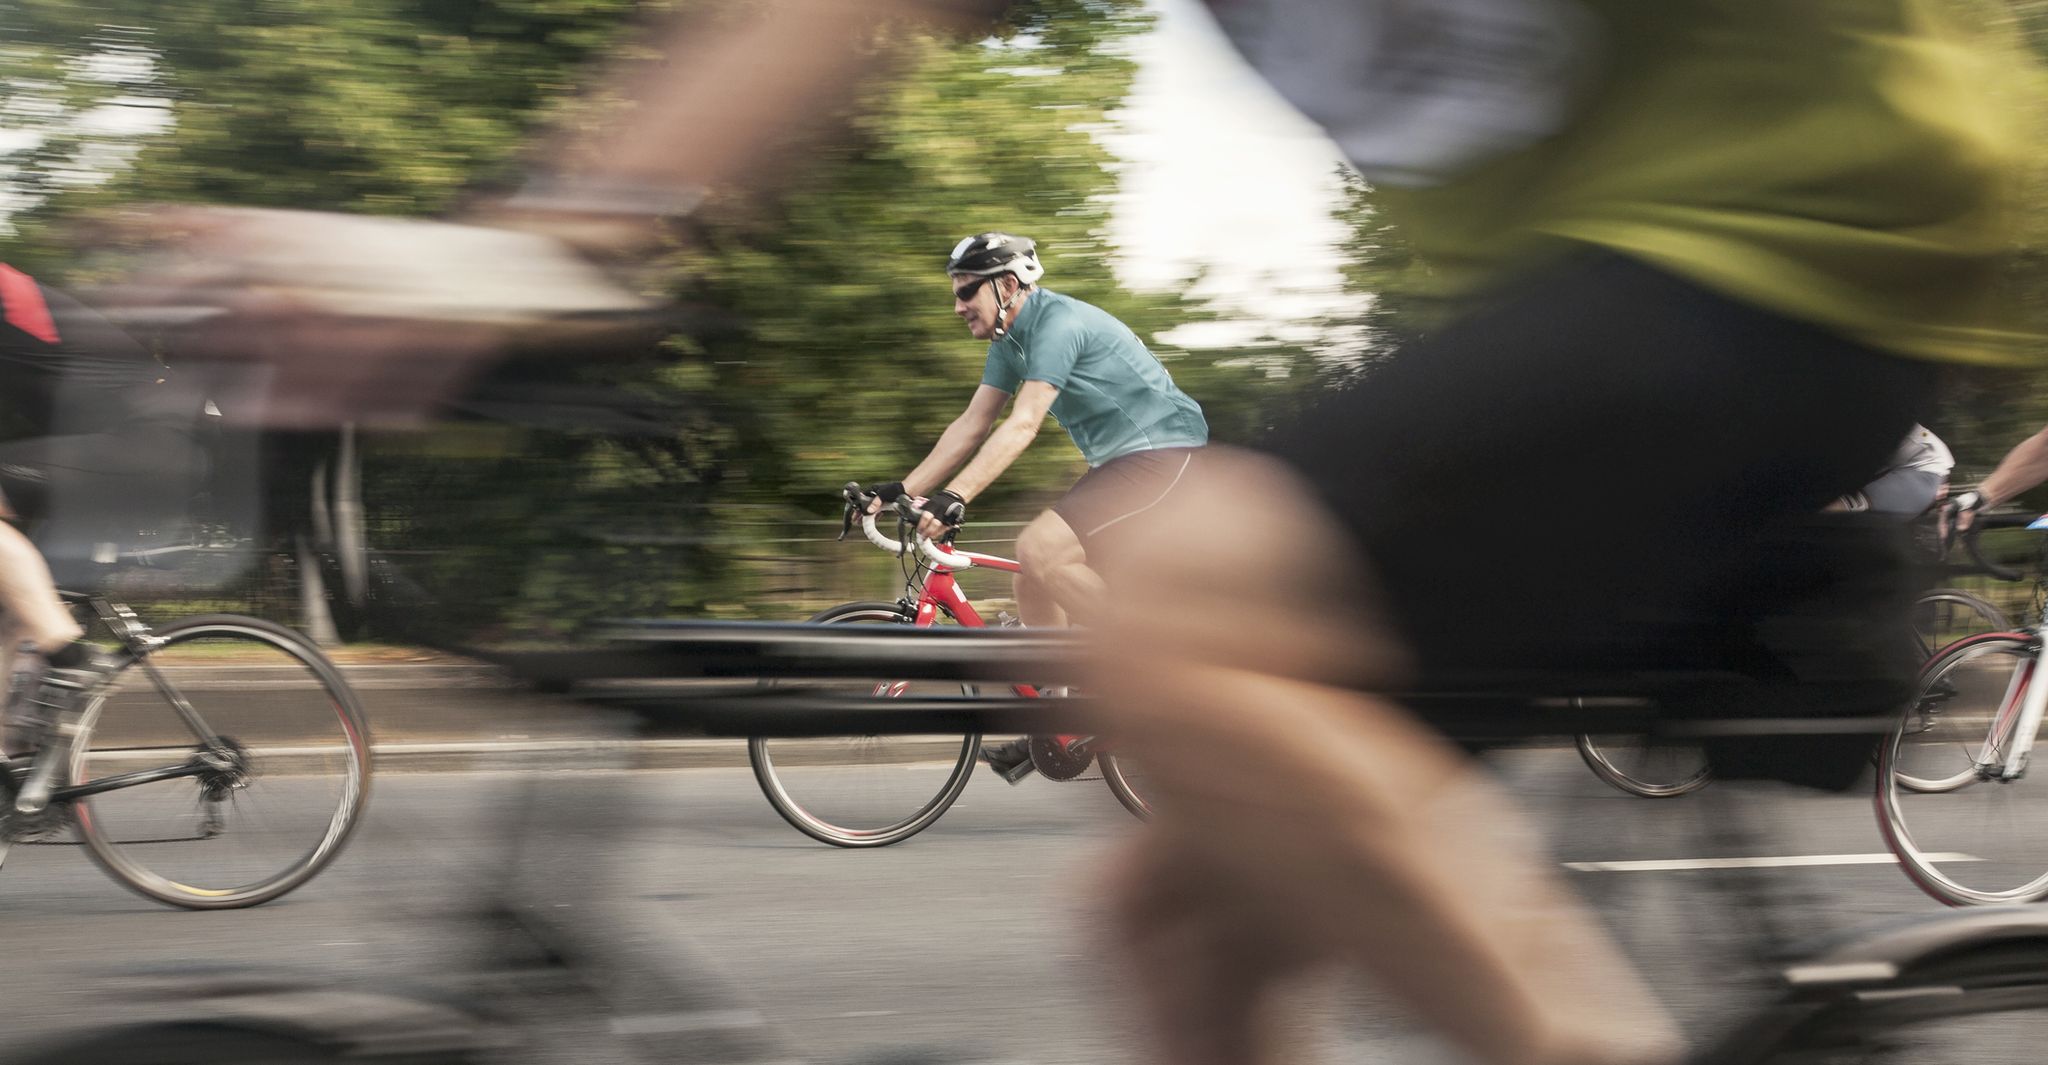 close up of racing cyclists speeding on urban road in racing cycle race